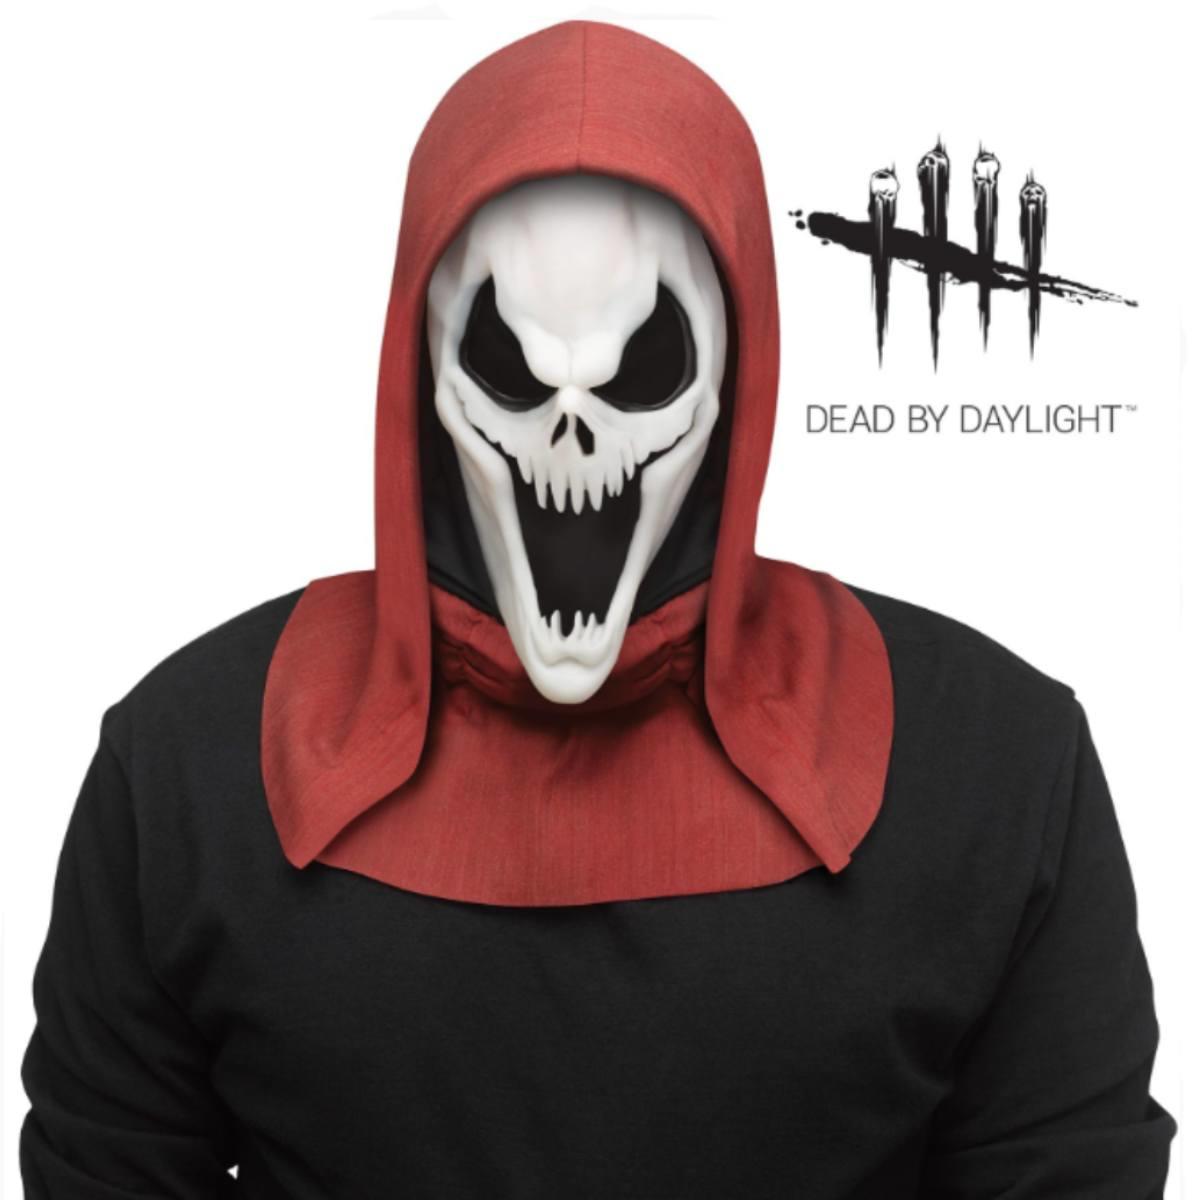 Ghostface Dead by Daylight Viper Face Mask by Fun World 93502V available here at Karnival Costumes online party shop